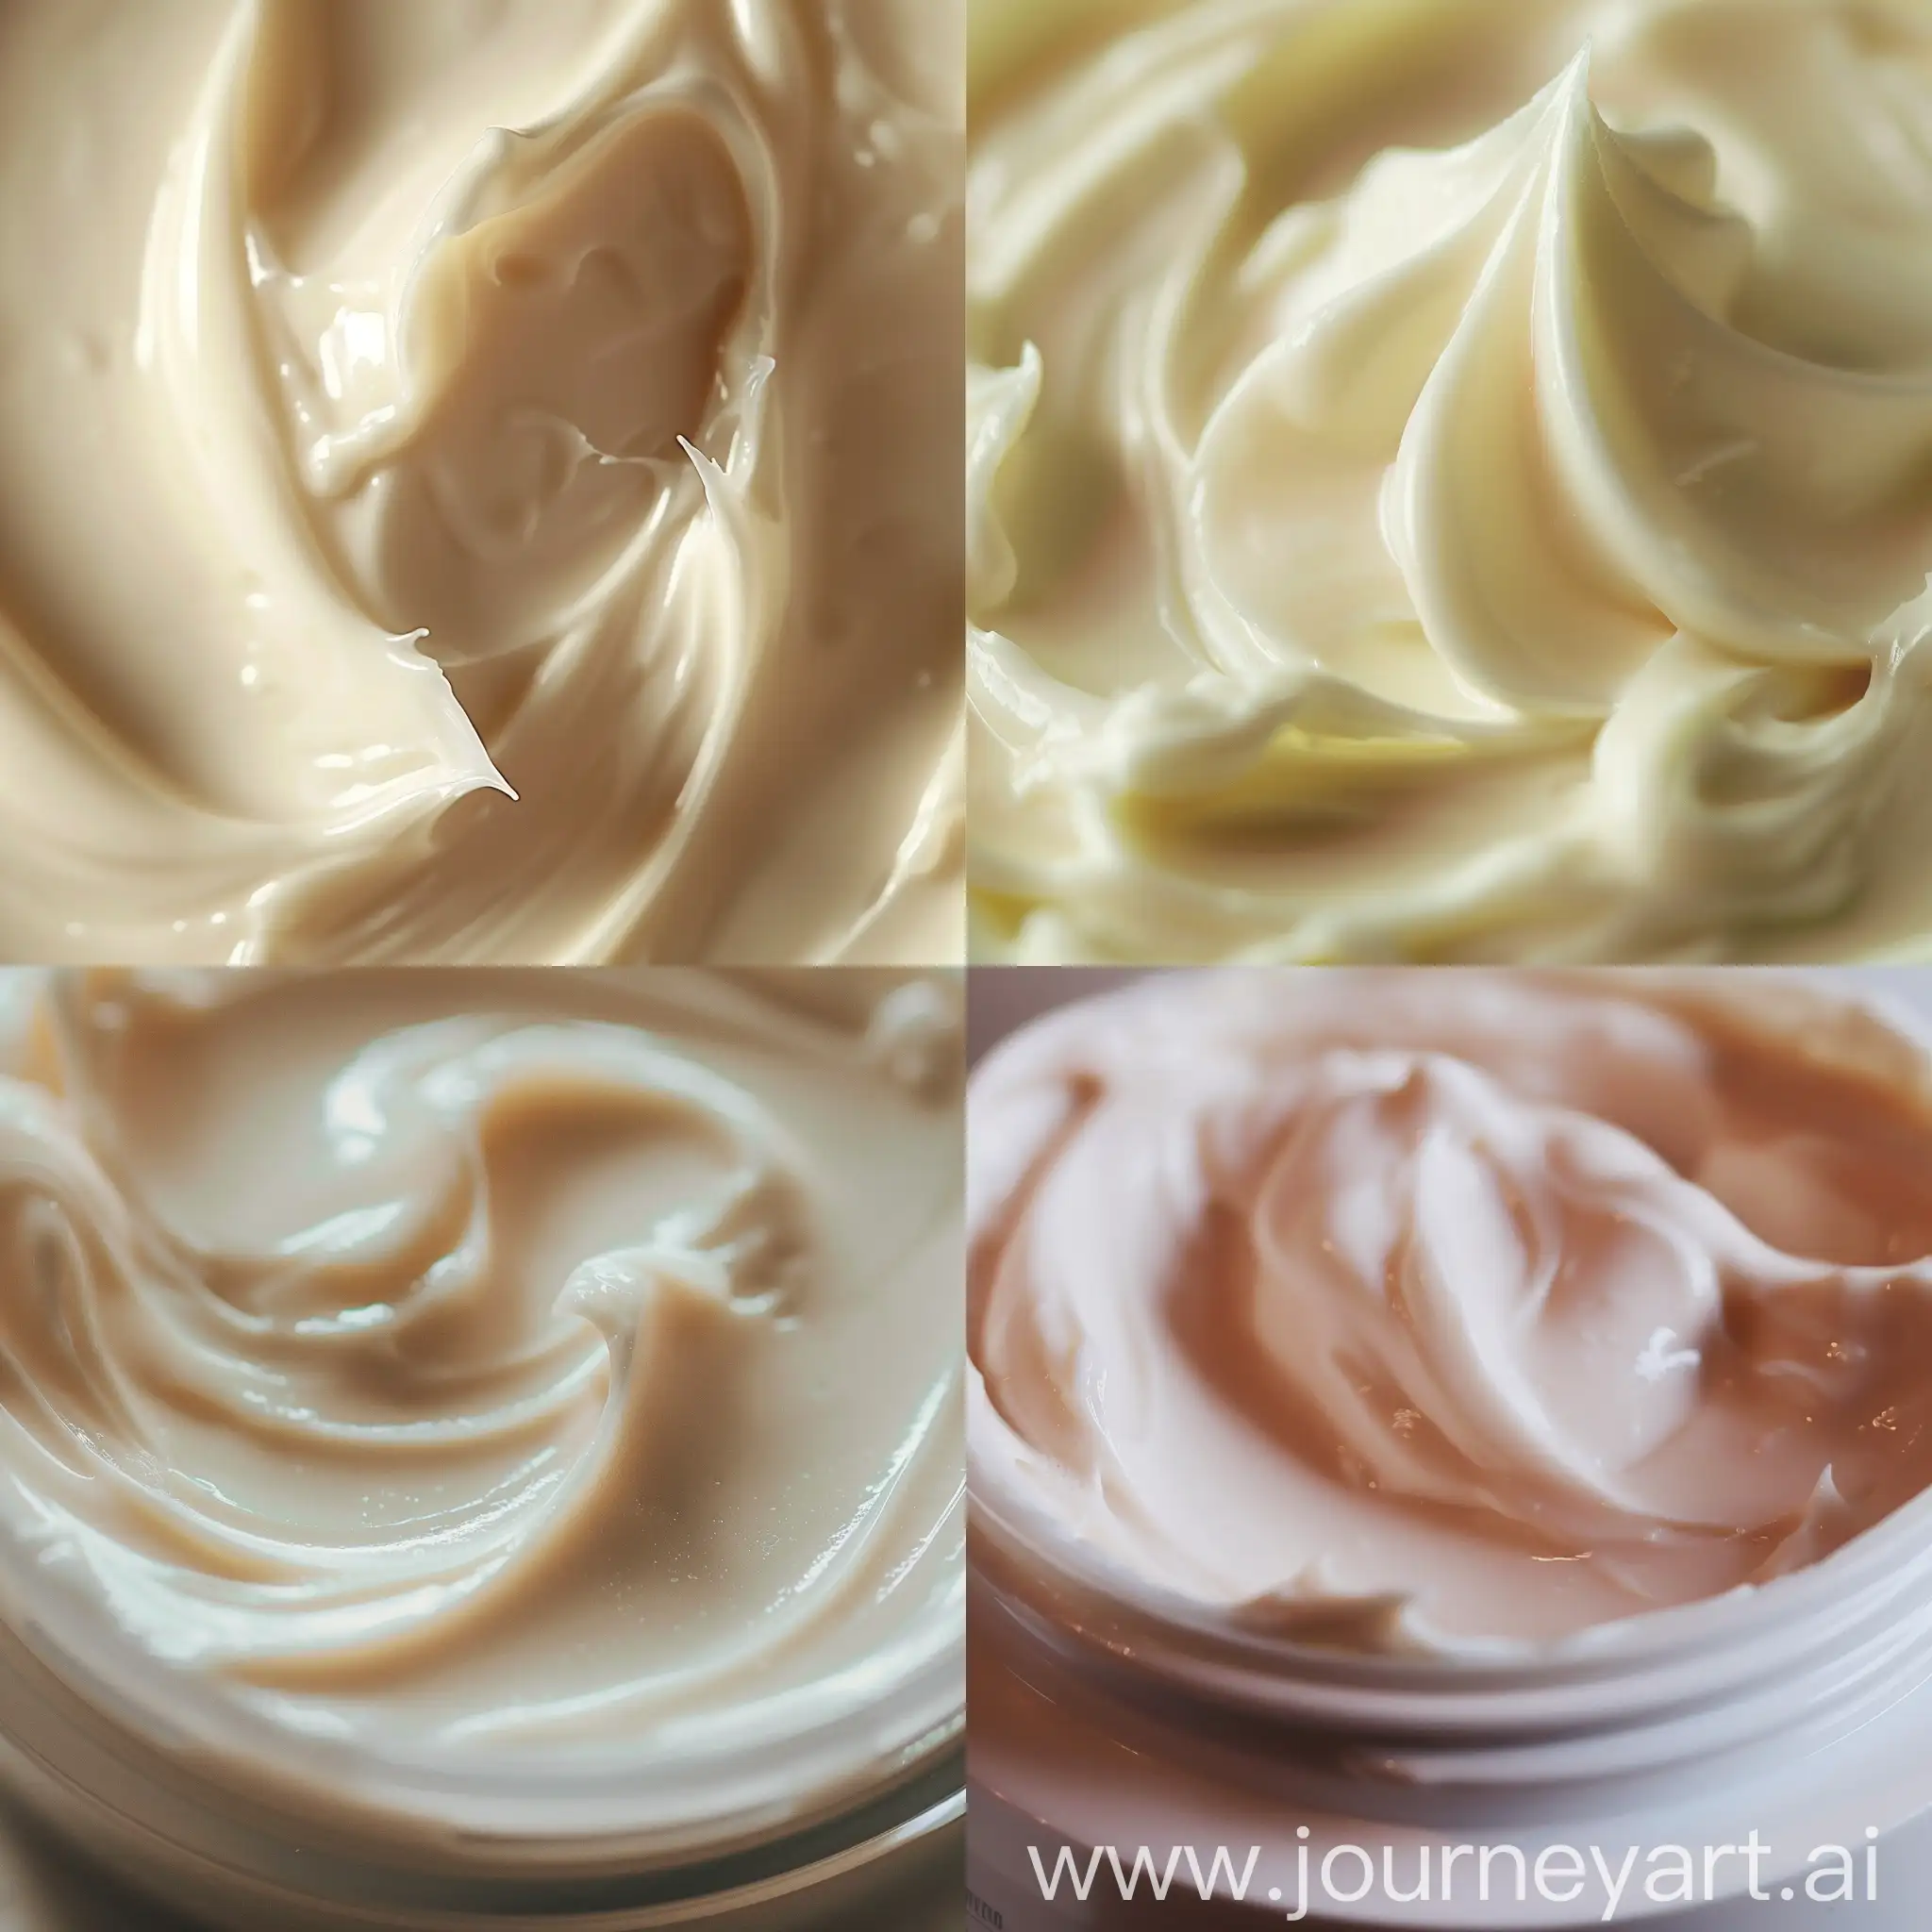 Luxurious-Cream-Product-CloseUp-Capturing-Texture-and-Details